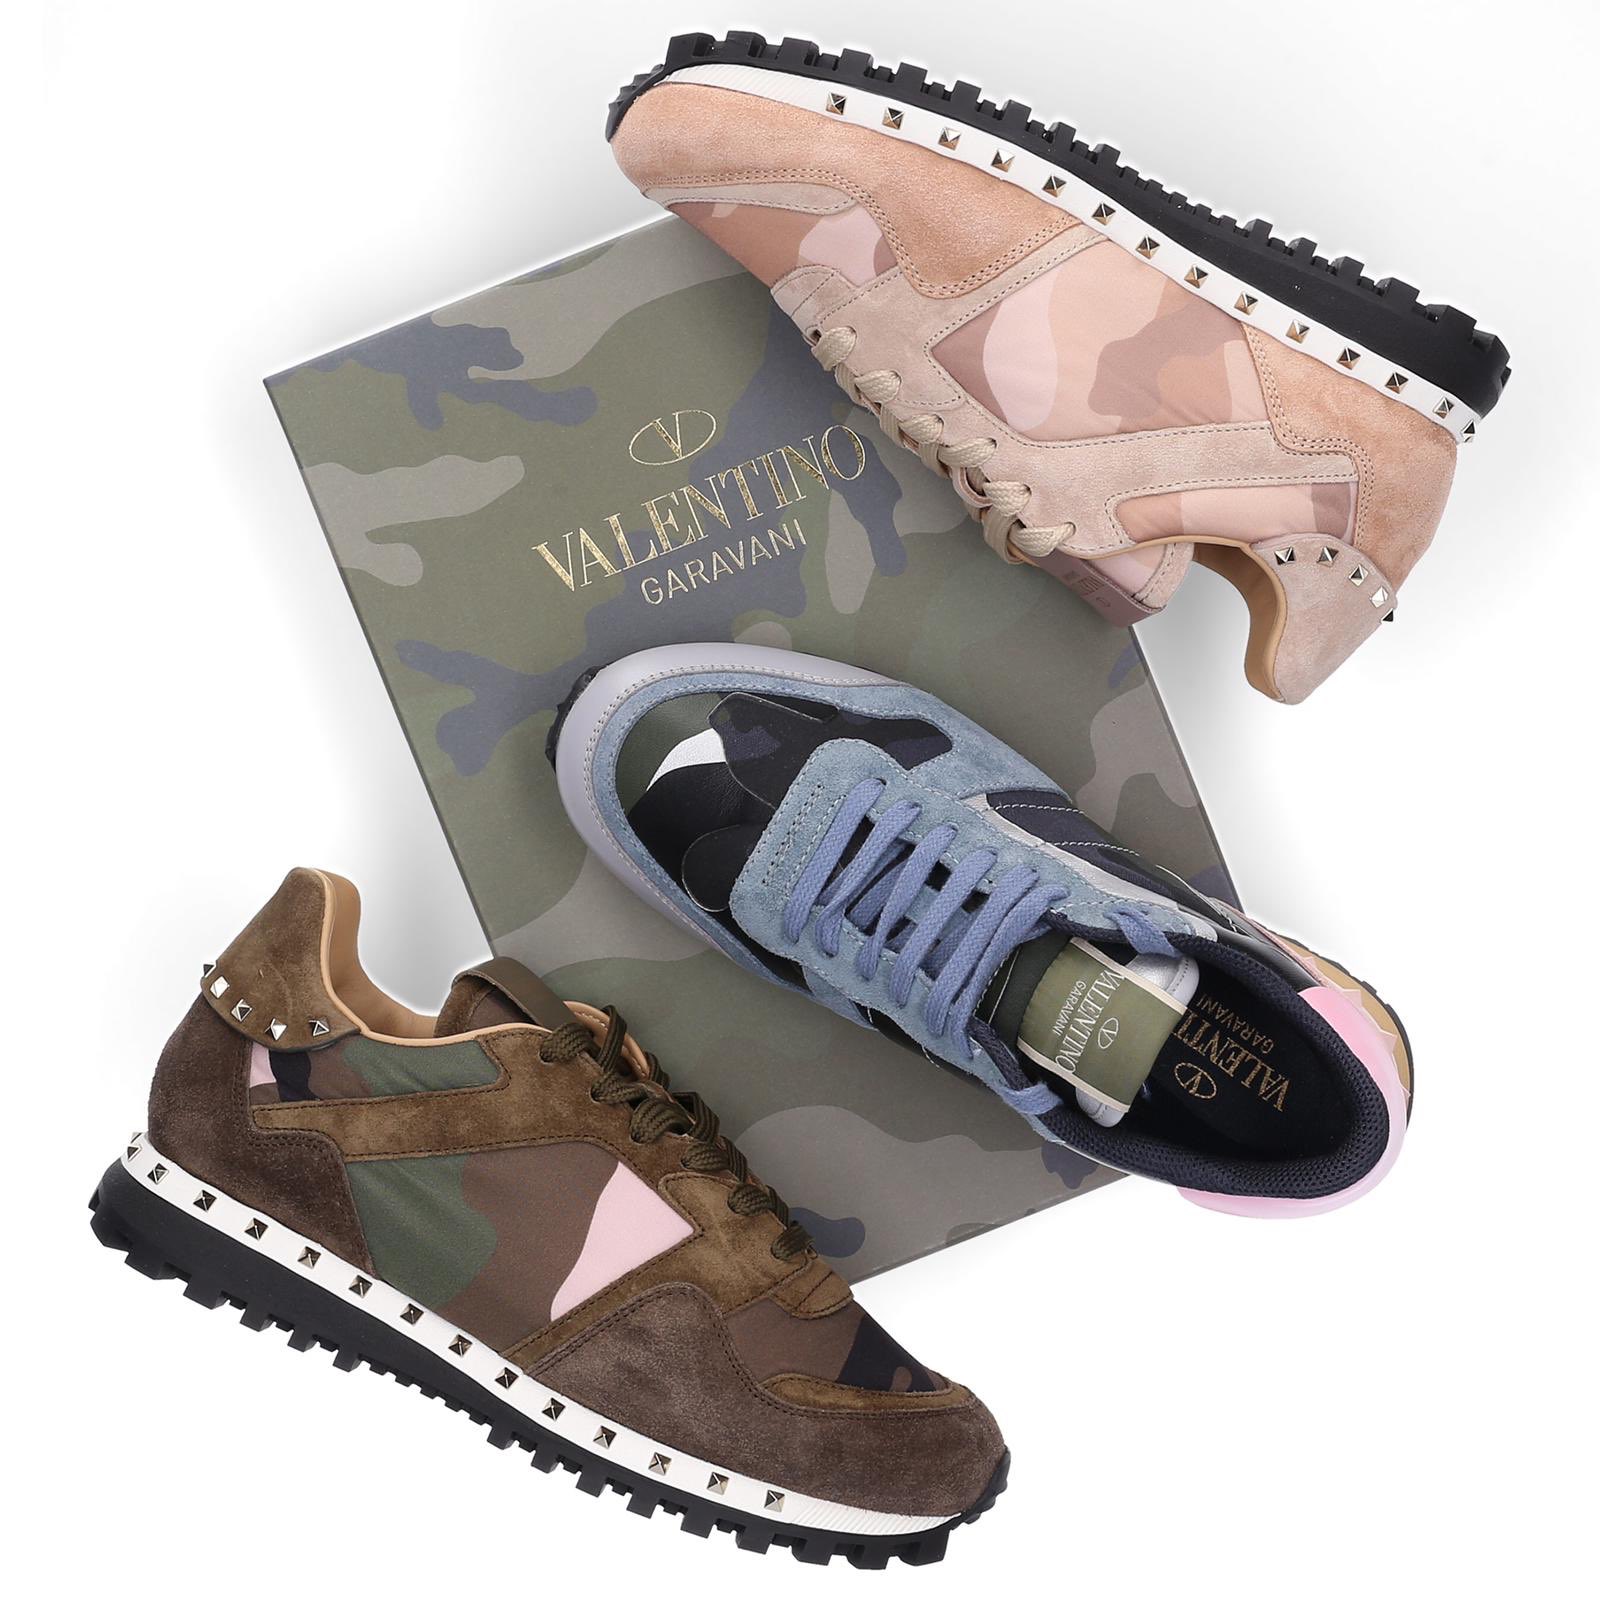 Sløset Creed Hotellet Mybudapester.com on Twitter: "Made in 🇮🇹... these beautiful VALENTINO  Runners will be available soon at https://t.co/bAyNGRLm5l! 😍 #valentino  #sneakers #mybudapestercom #berlin #hamburg https://t.co/c5swvAWmvd" /  Twitter